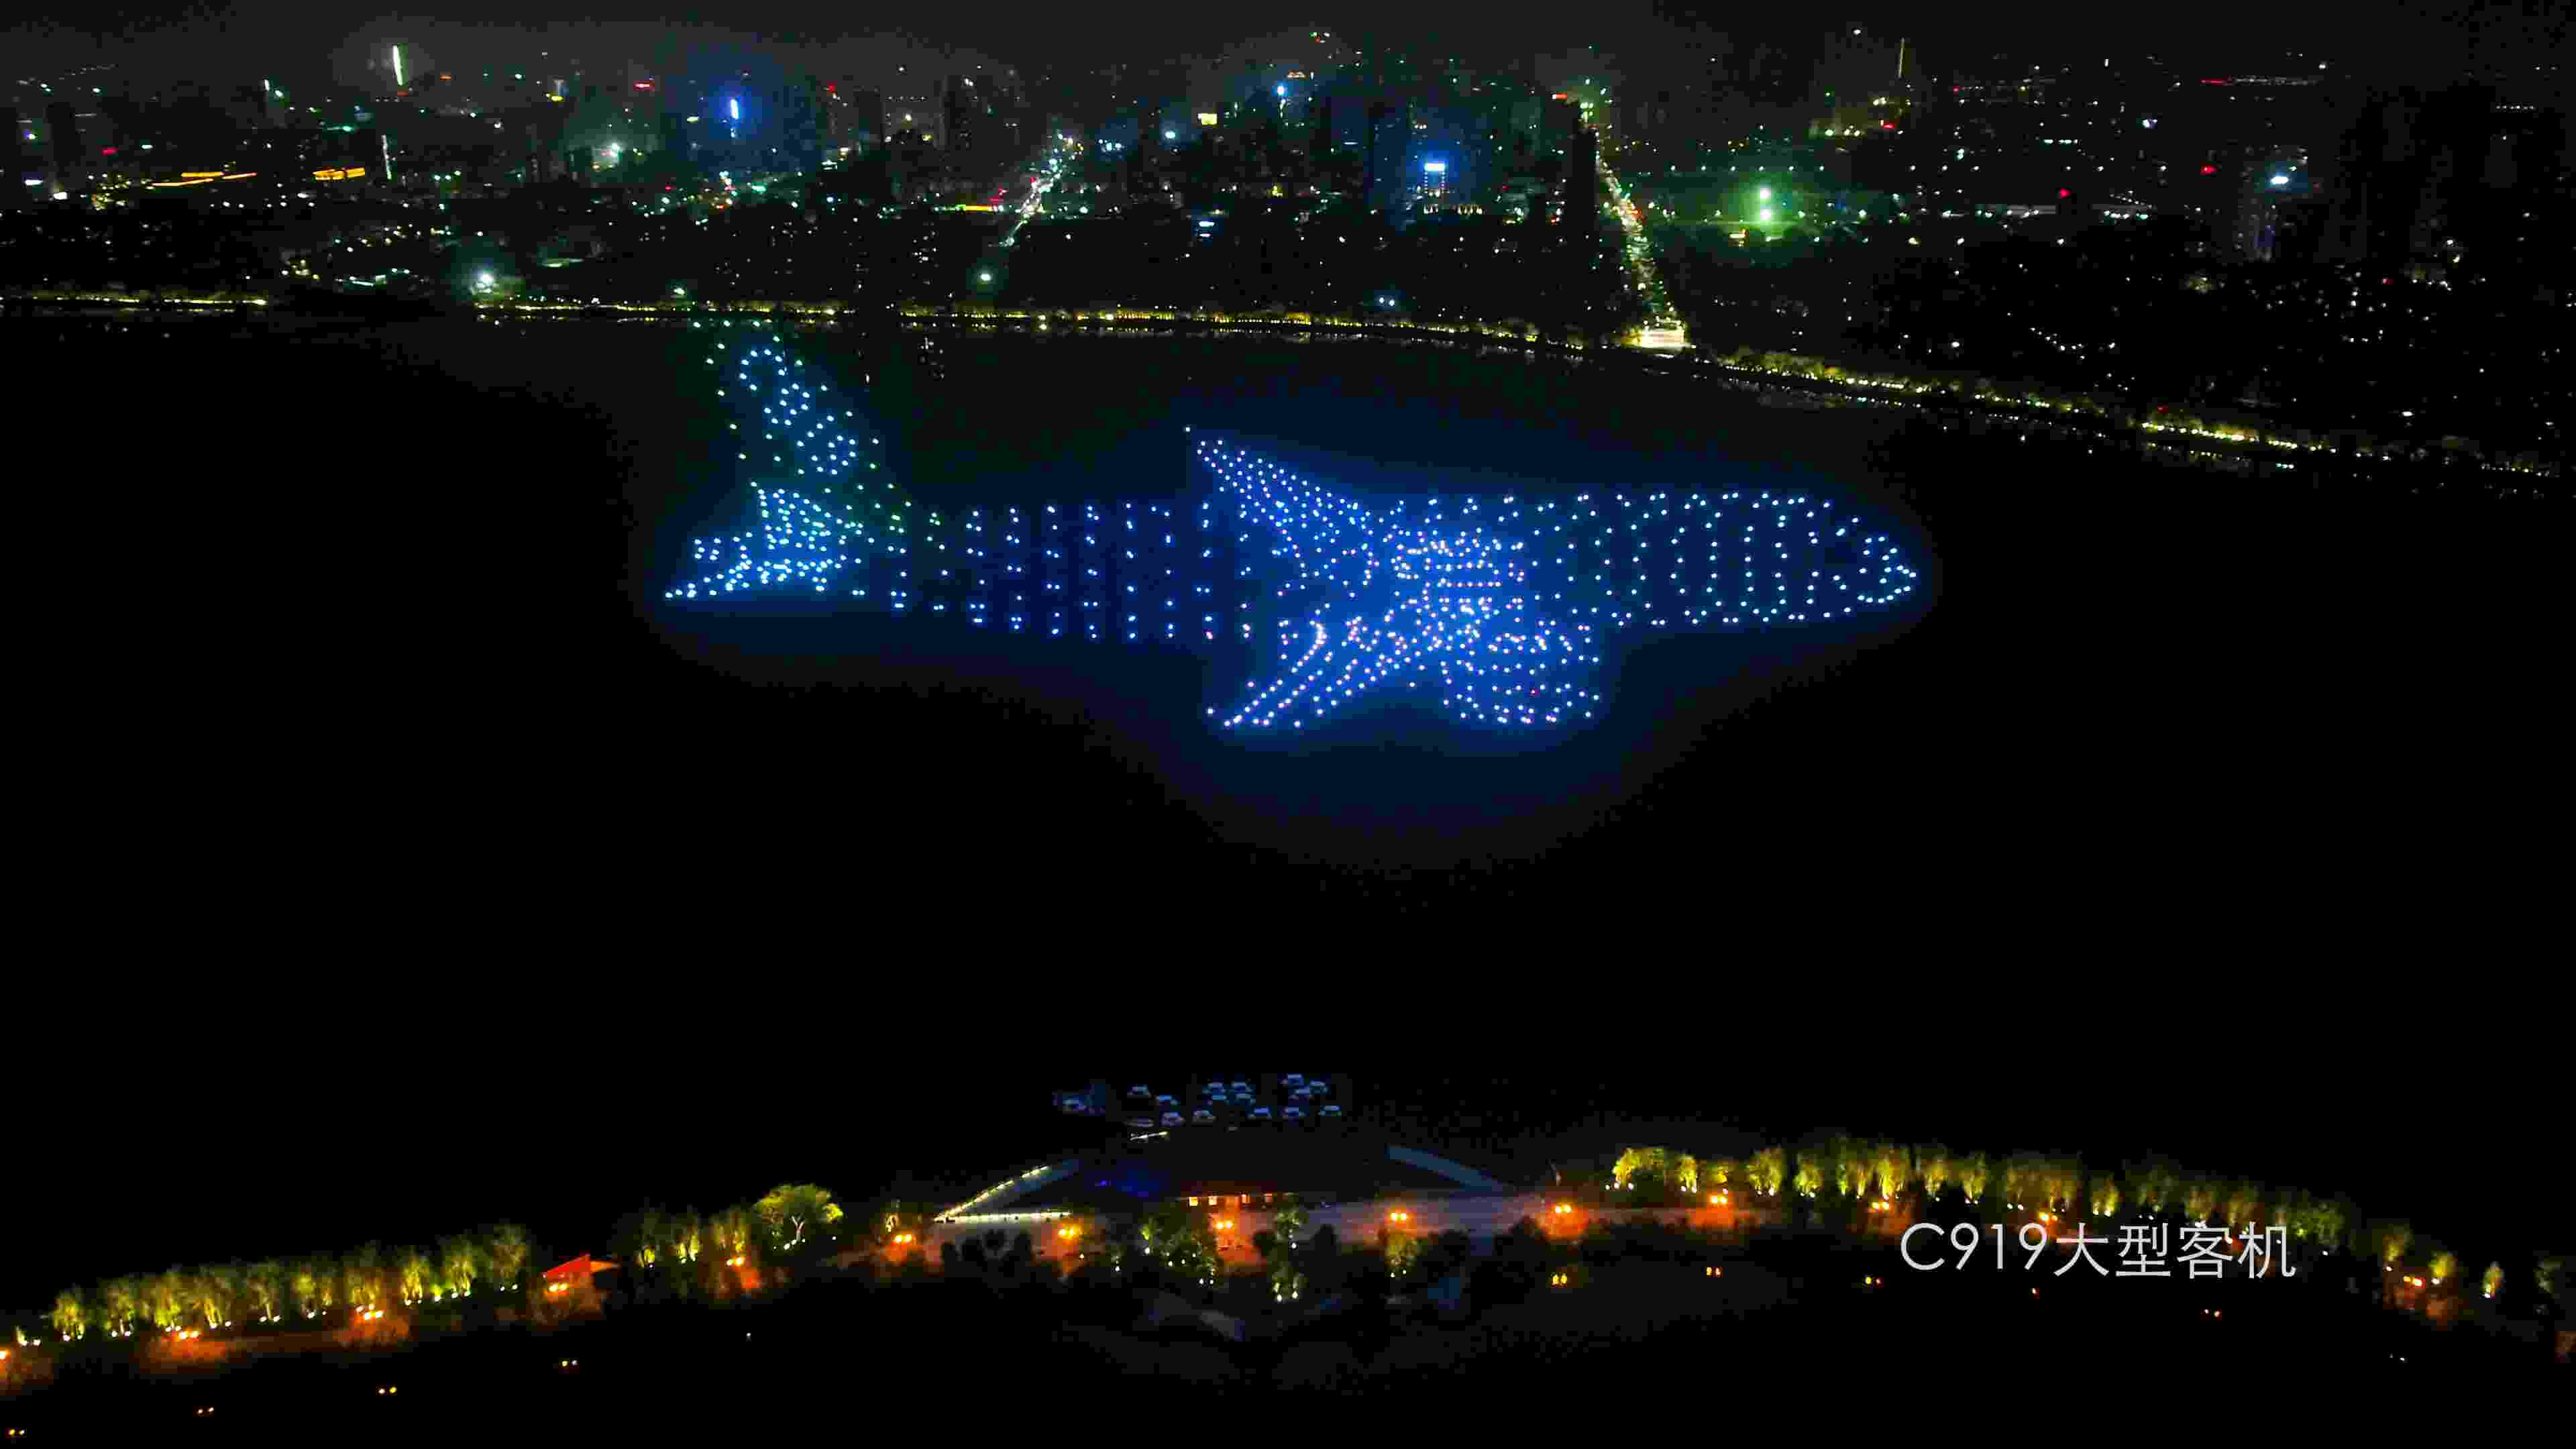 Formation drones light show